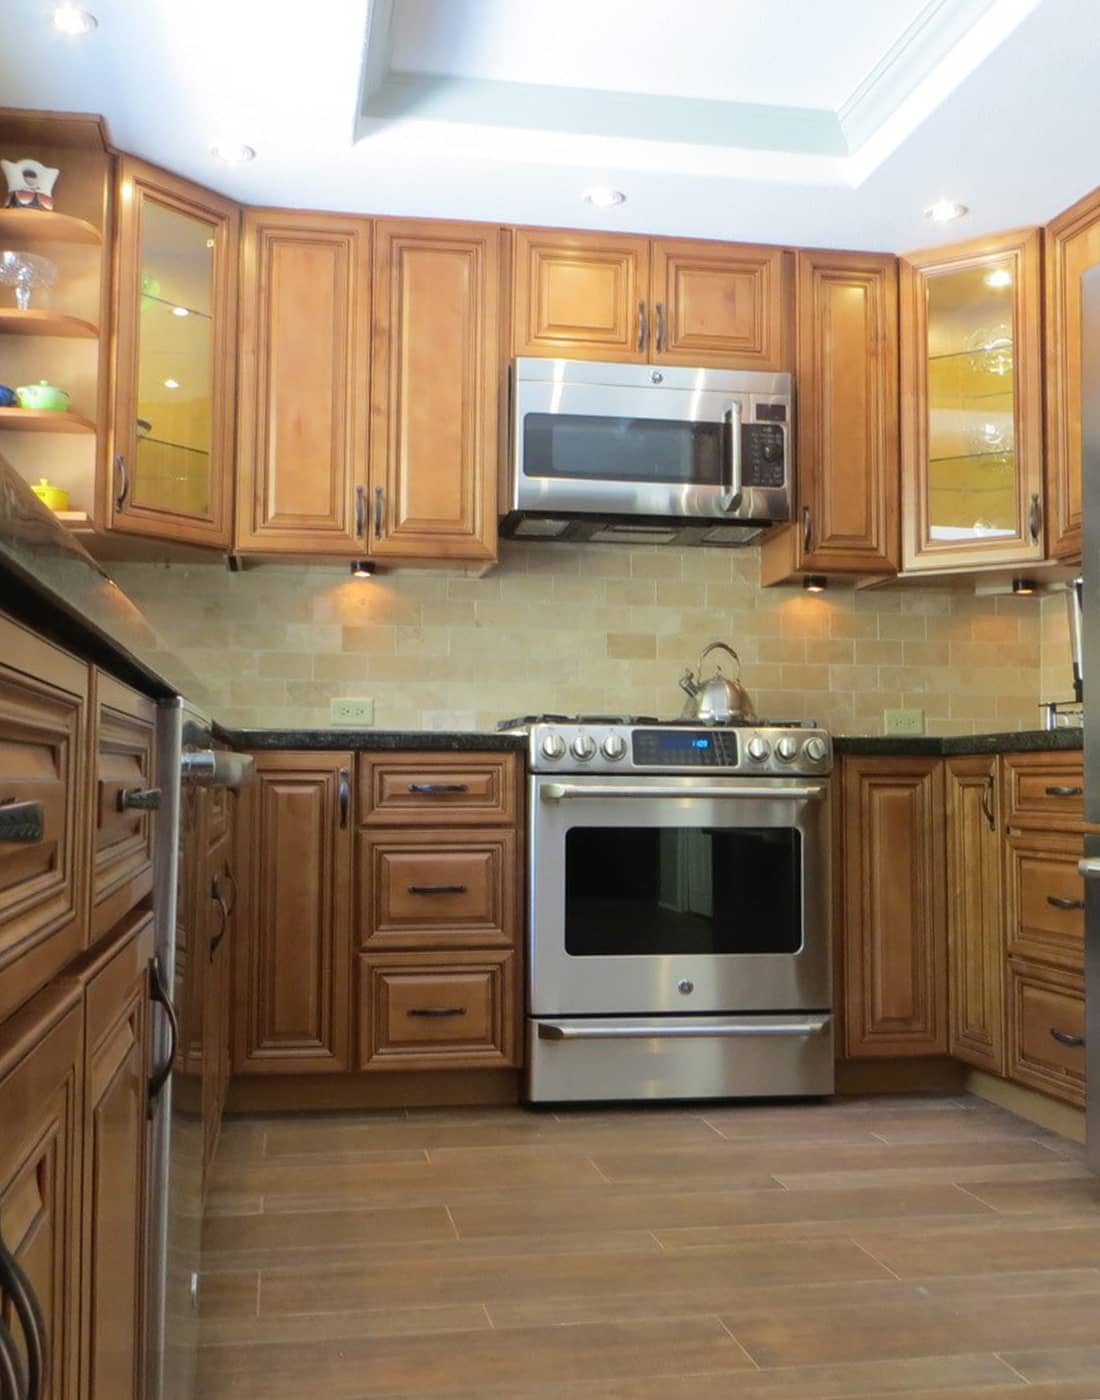 Newely remodeled kitchen